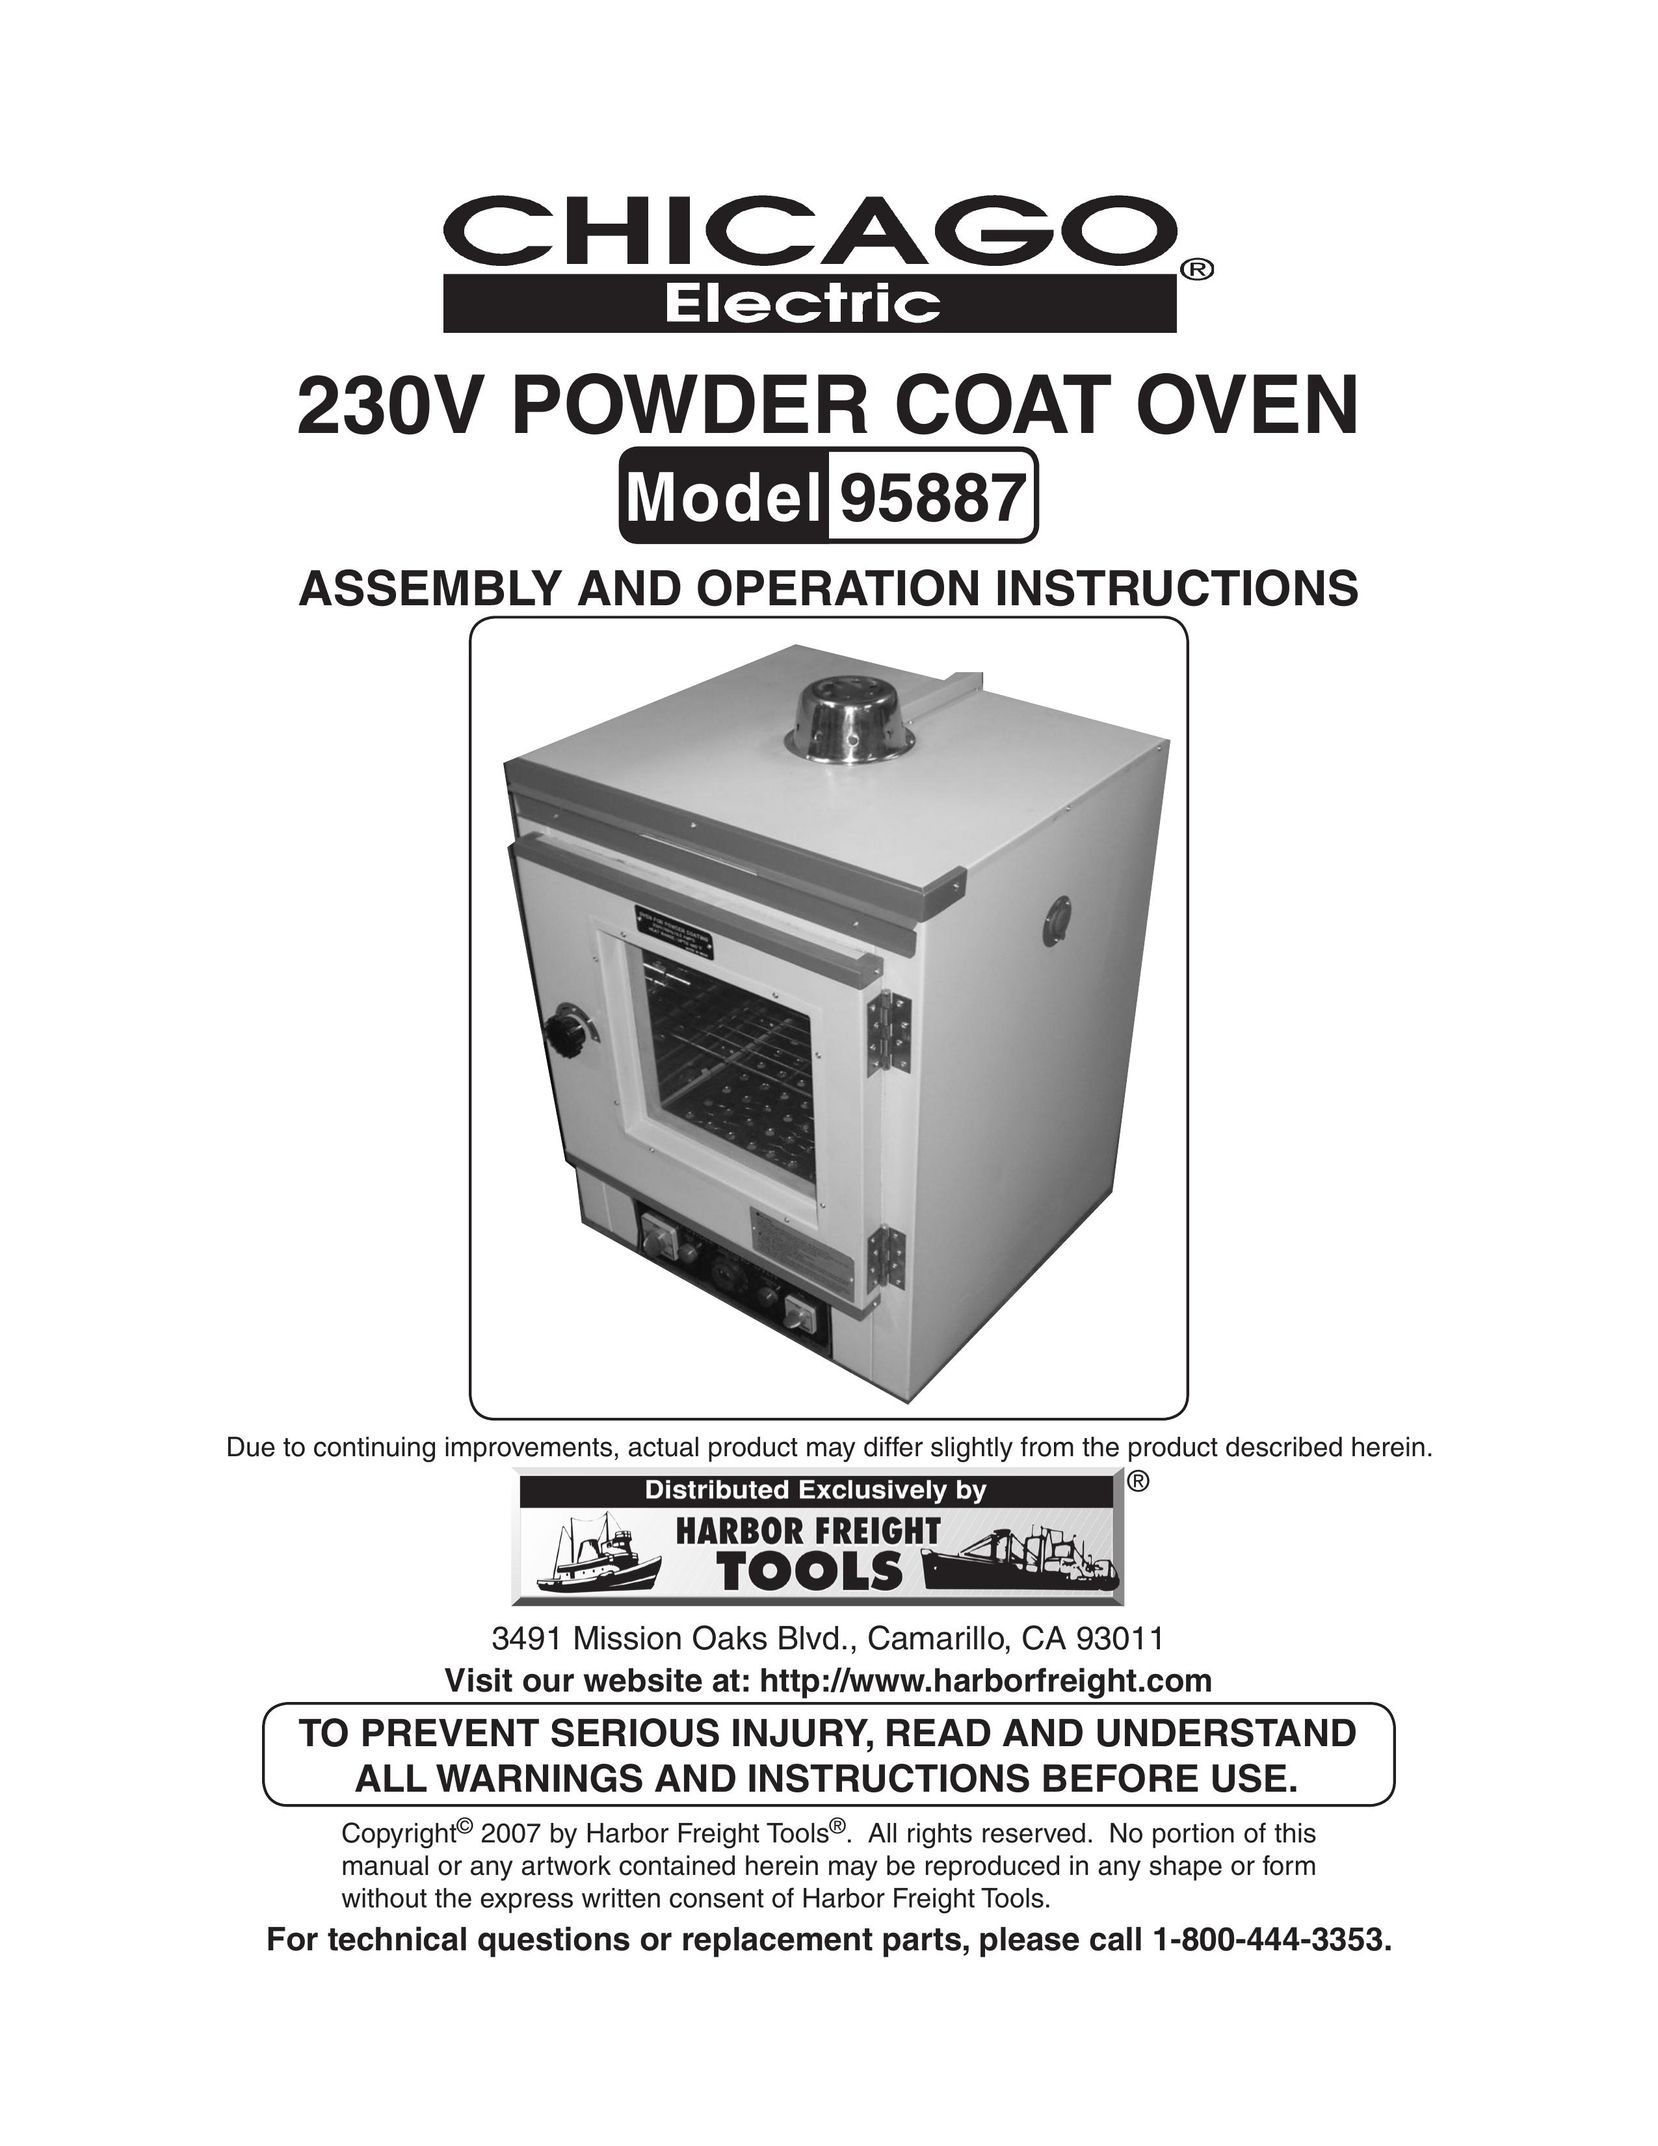 Chicago Electric 95887 Oven User Manual